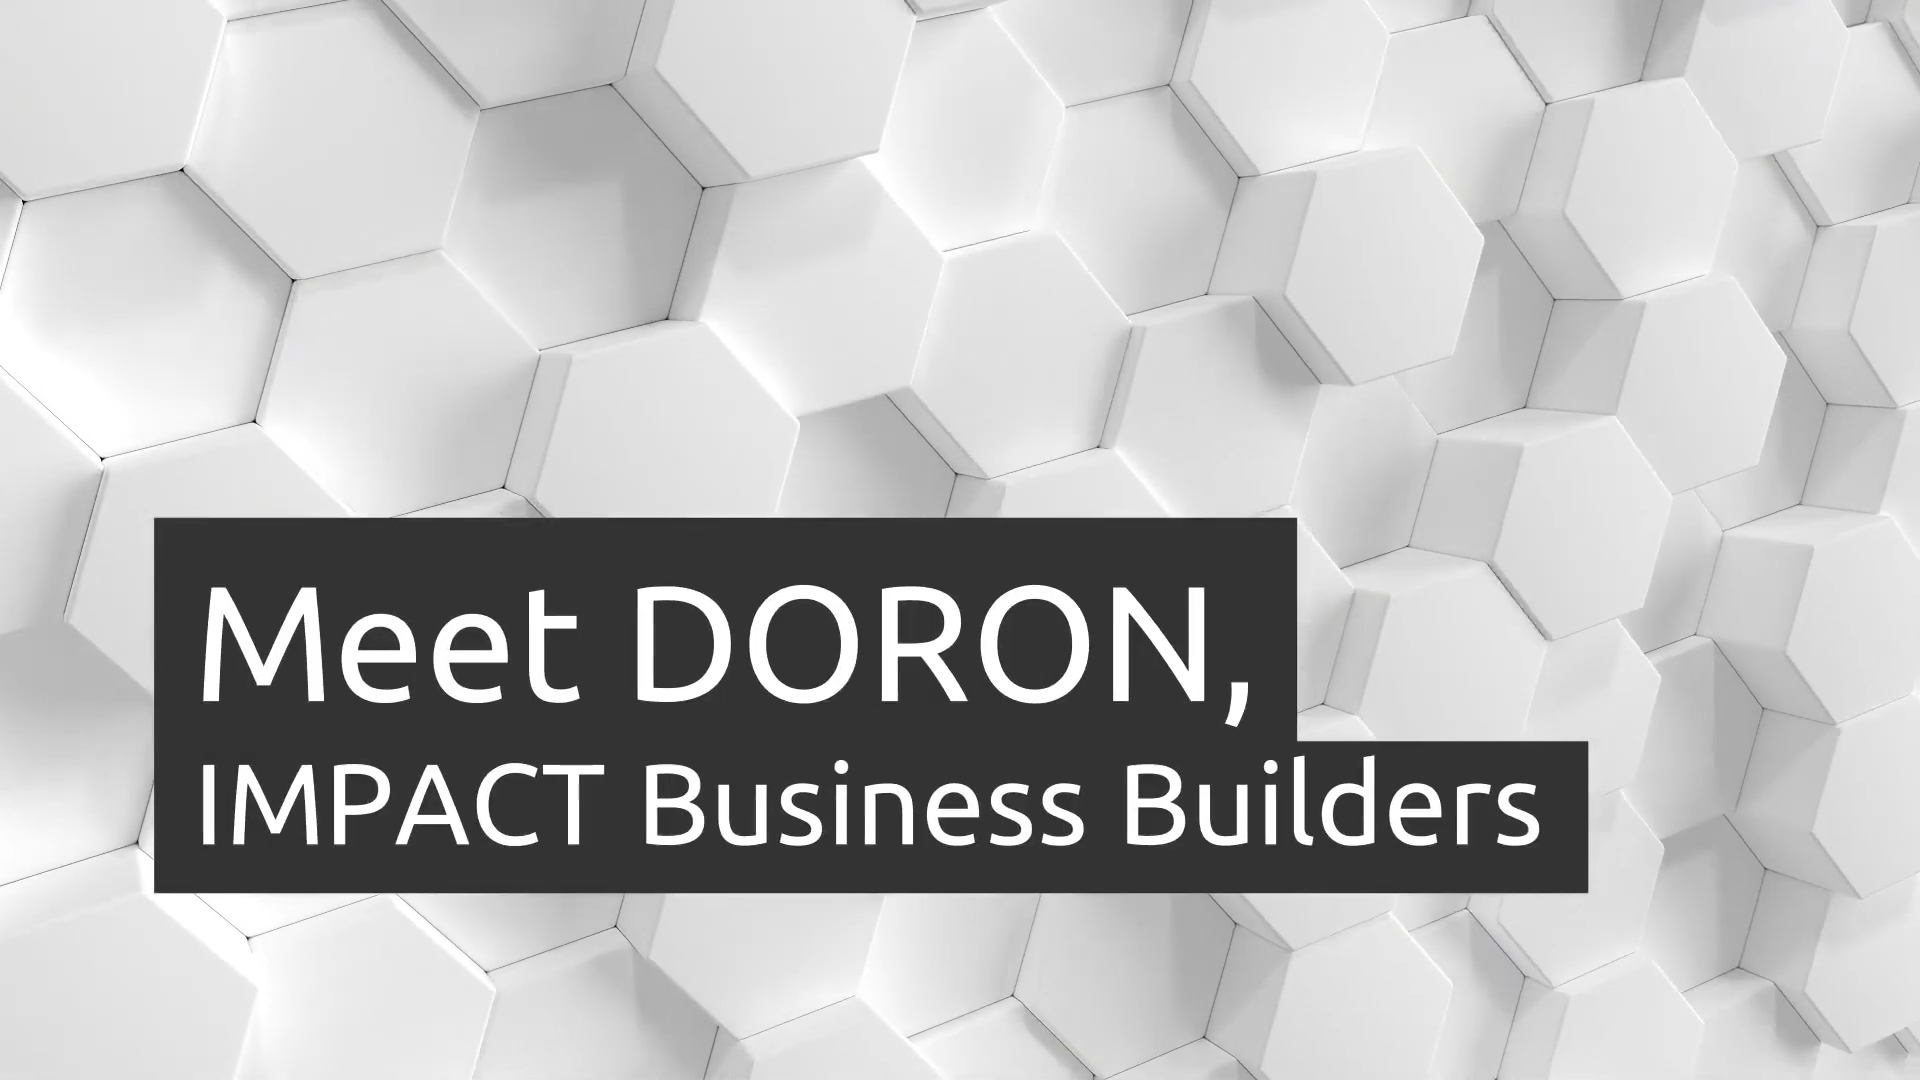 Doron Abrahami, CEO & Founder of IMPACT Business Builders